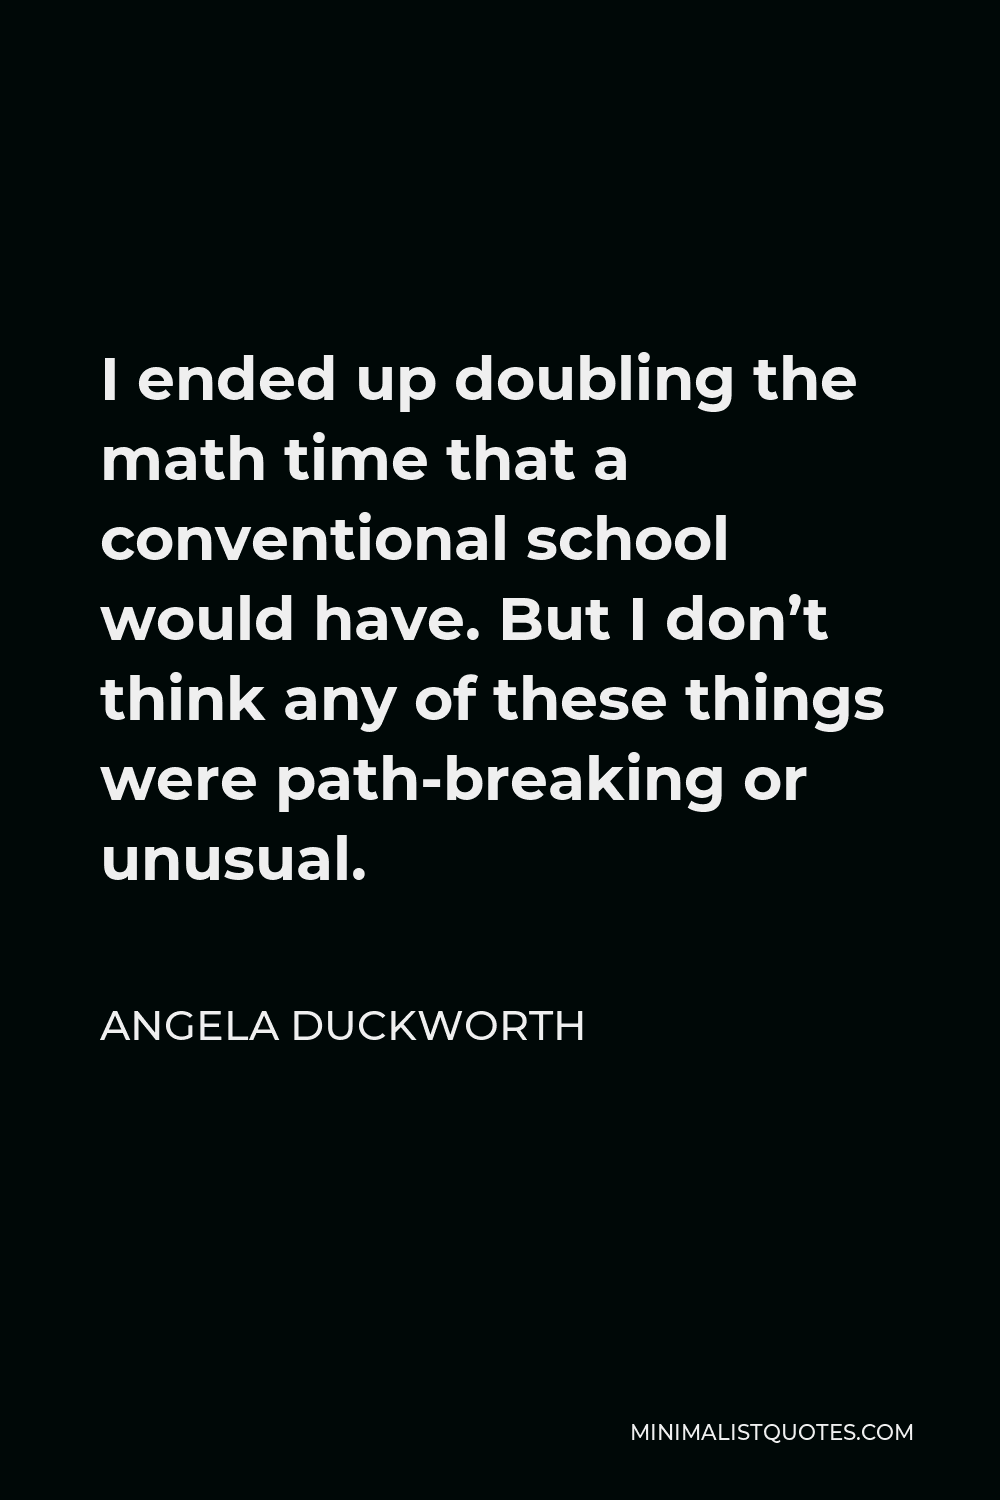 Angela Duckworth Quote - I ended up doubling the math time that a conventional school would have. But I don’t think any of these things were path-breaking or unusual.